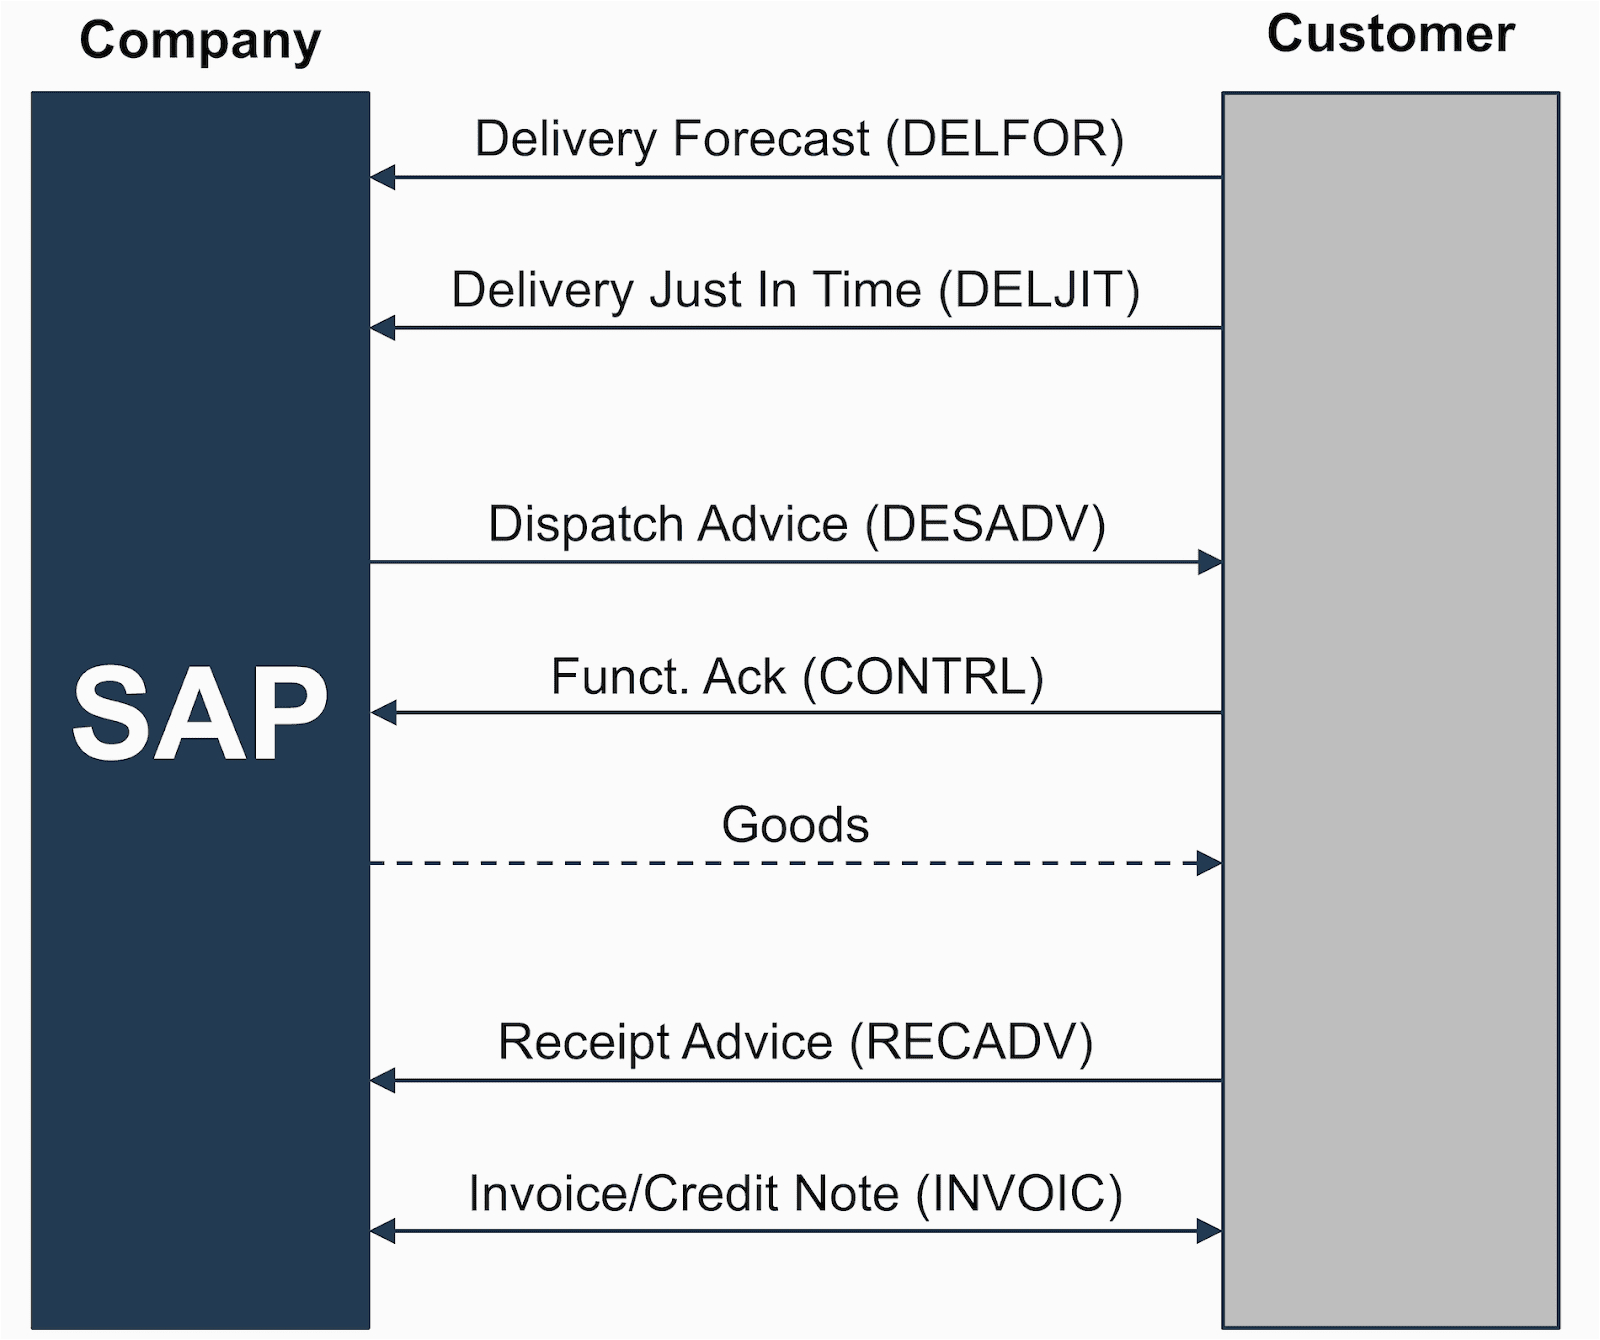 Scheduling Agreements In Sap Sd Sample Resumes What is Sap Sales & Distribution [sd] Module – Learning Guide